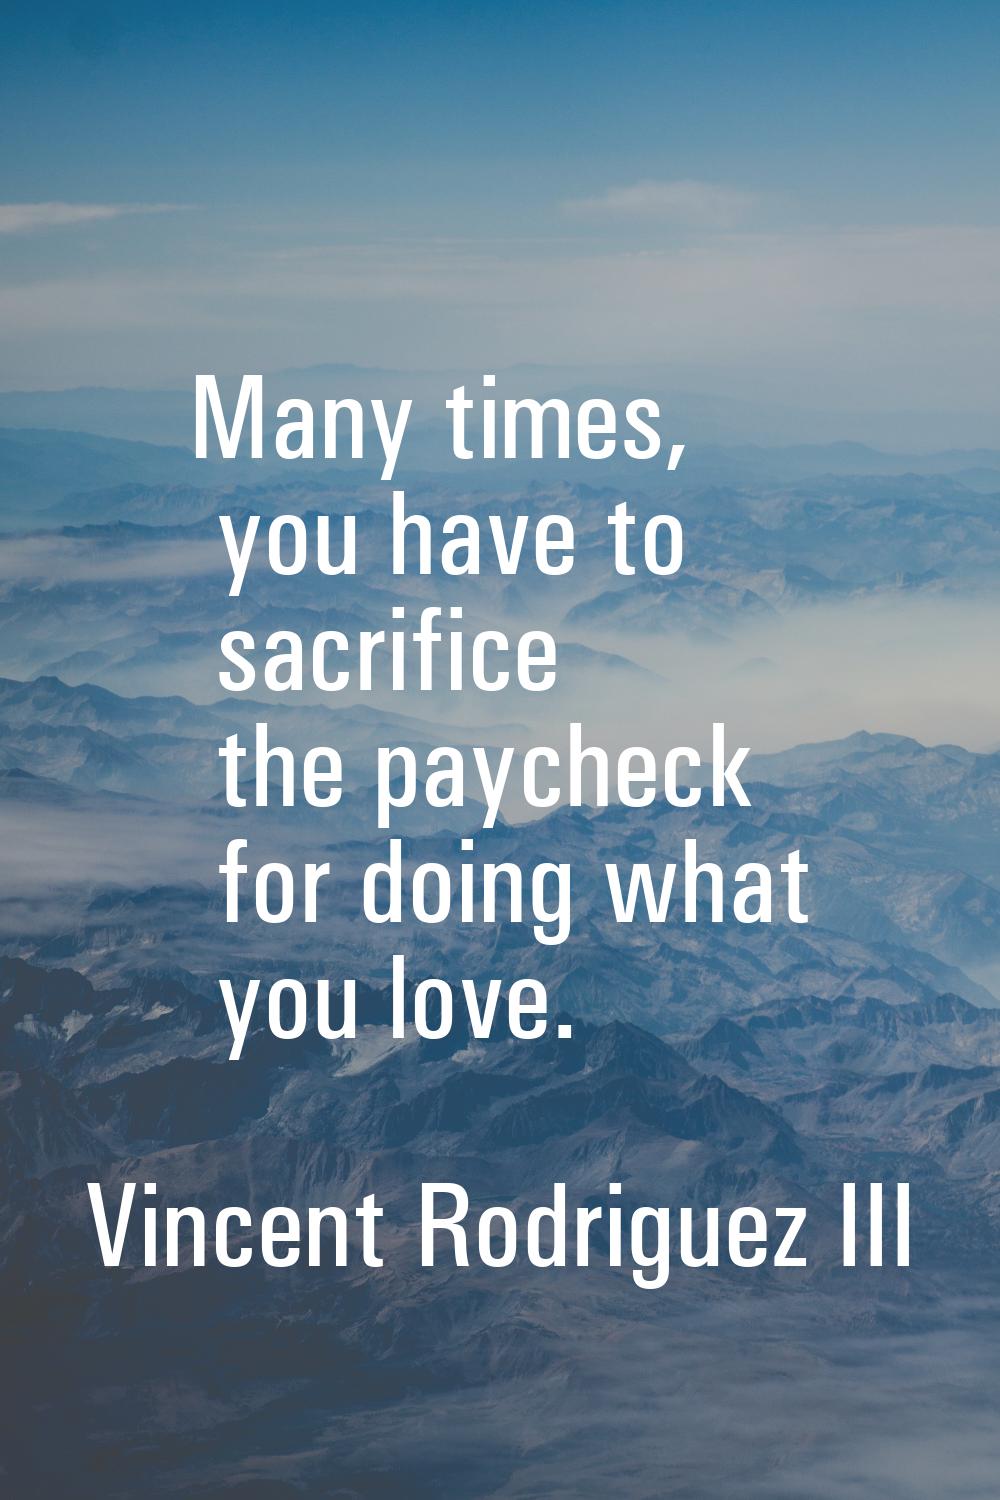 Many times, you have to sacrifice the paycheck for doing what you love.